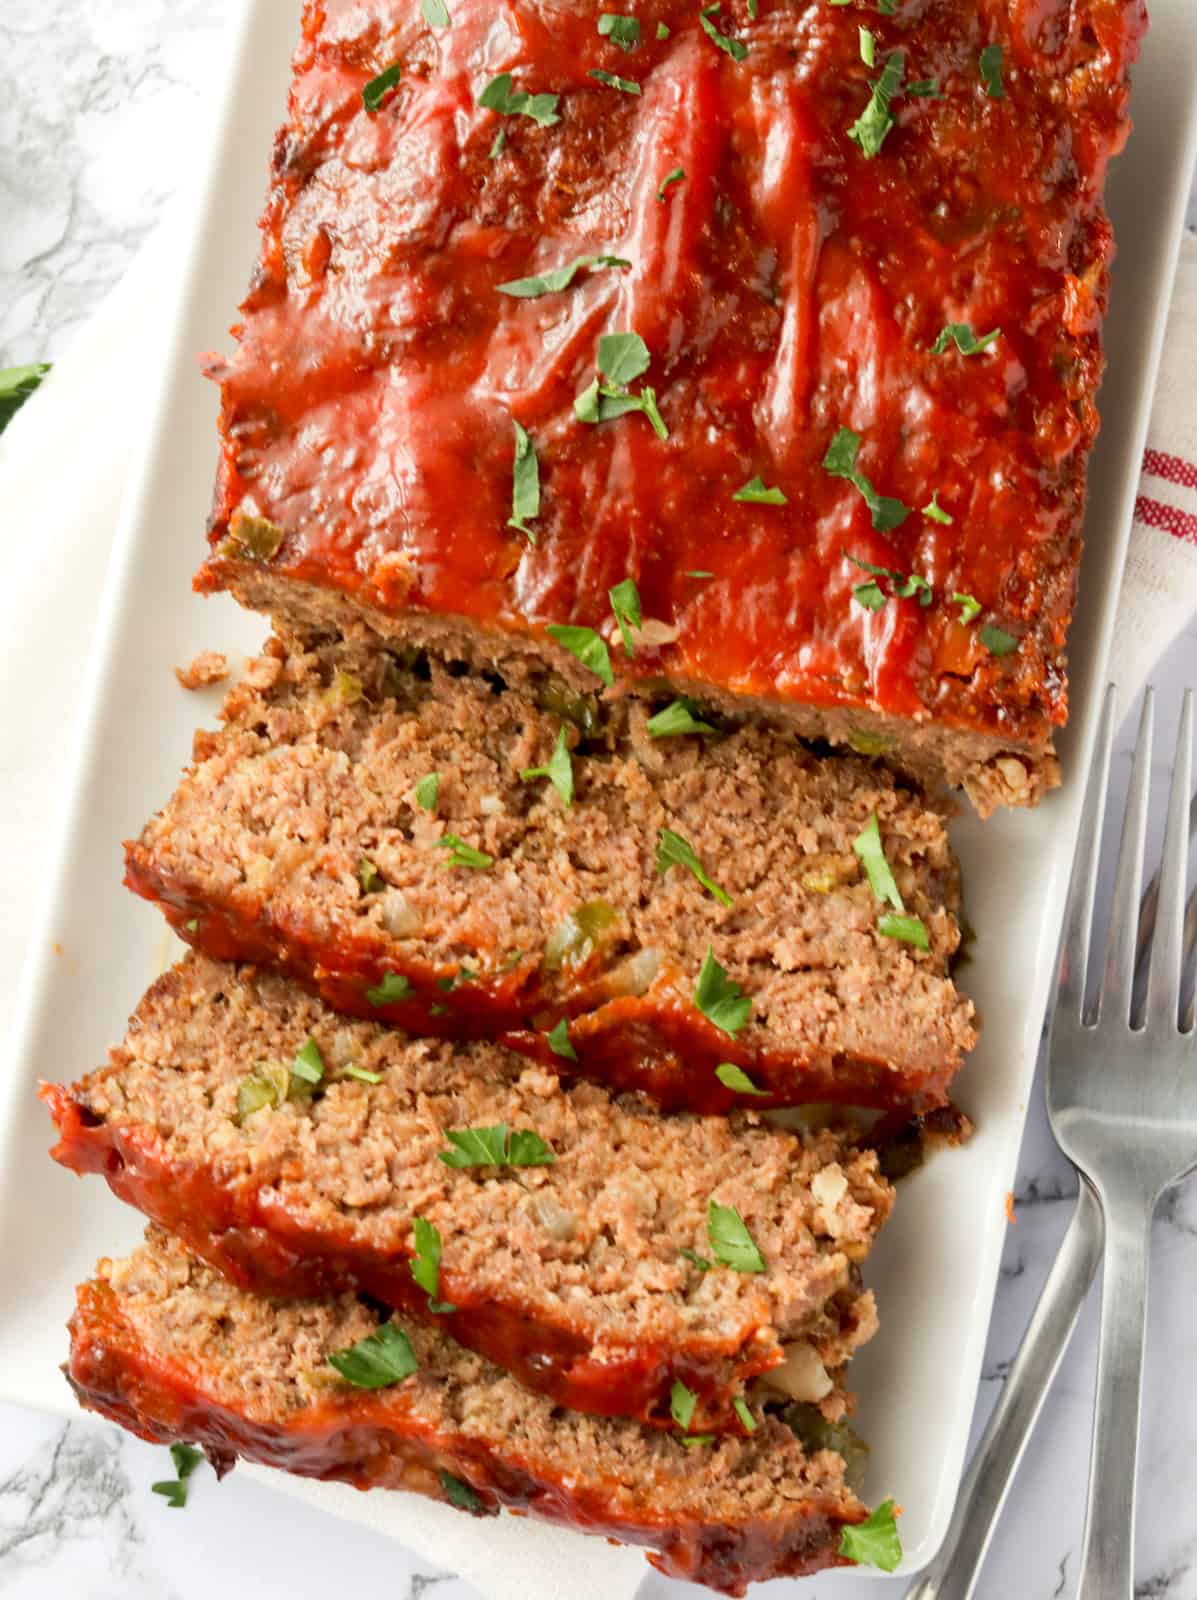 Authentic comfort-food Southern meatloaf